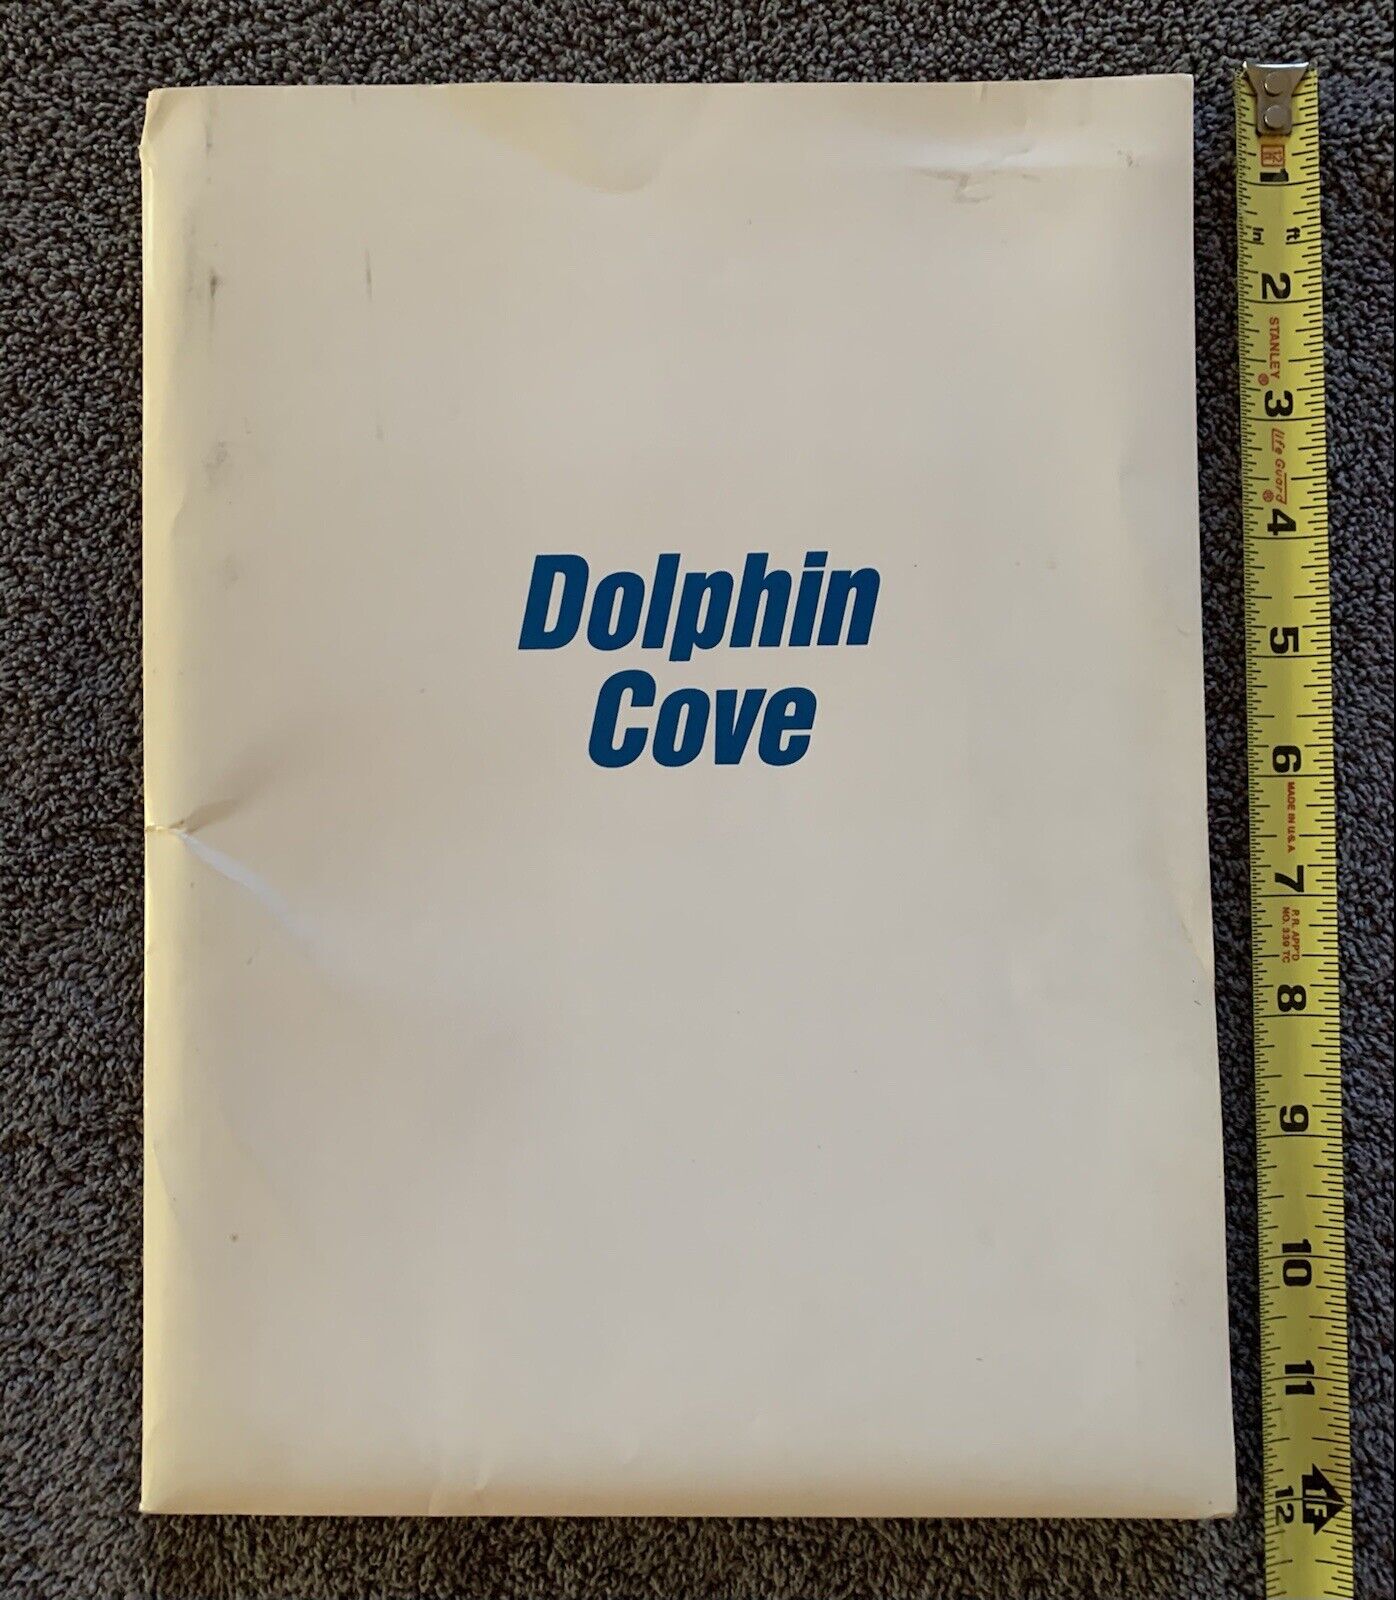 Rare 1989 Dolphin Cove Tv Show Press Kit With Photos & Slides - Cult Following